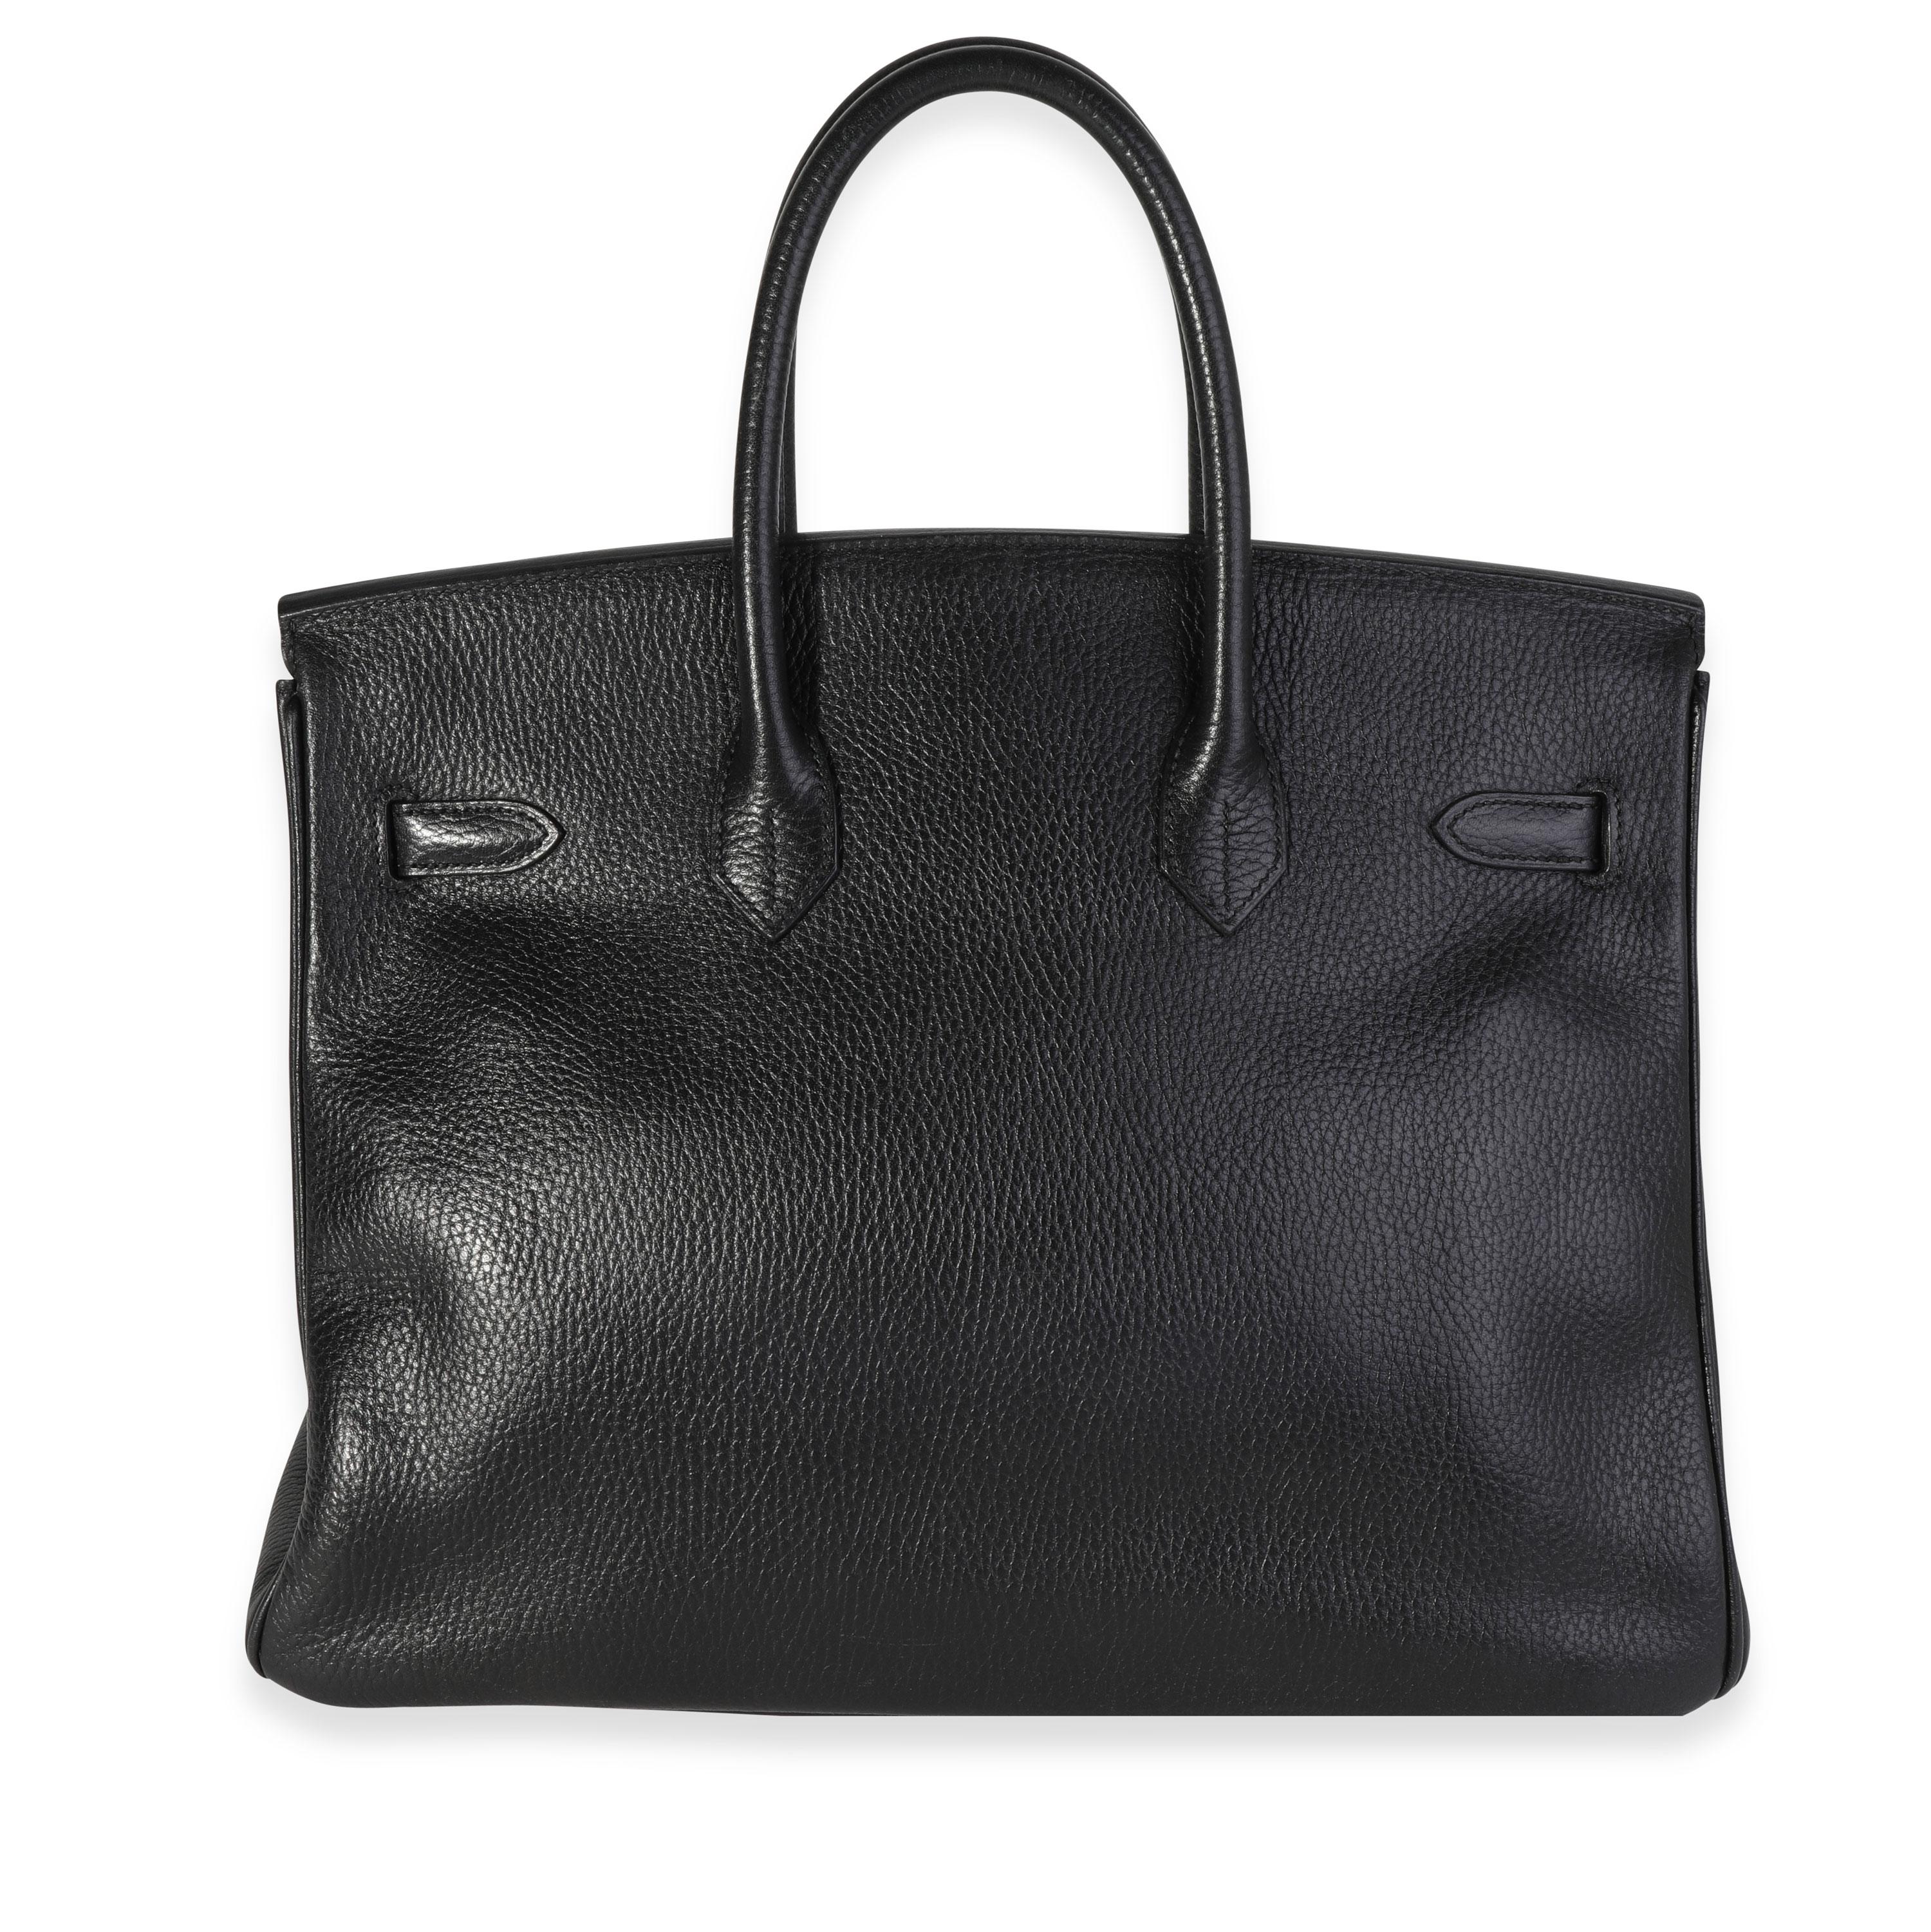 Listing Title: Hermès Black Ardennes Birkin 35 PHW
SKU: 119415
Condition: Pre-owned (3000)
Handbag Condition: Very Good
Condition Comments: Very Good Condition. Scuffing to corners. Scratching and tarnishing to hardware. Scuffing, light marks, and